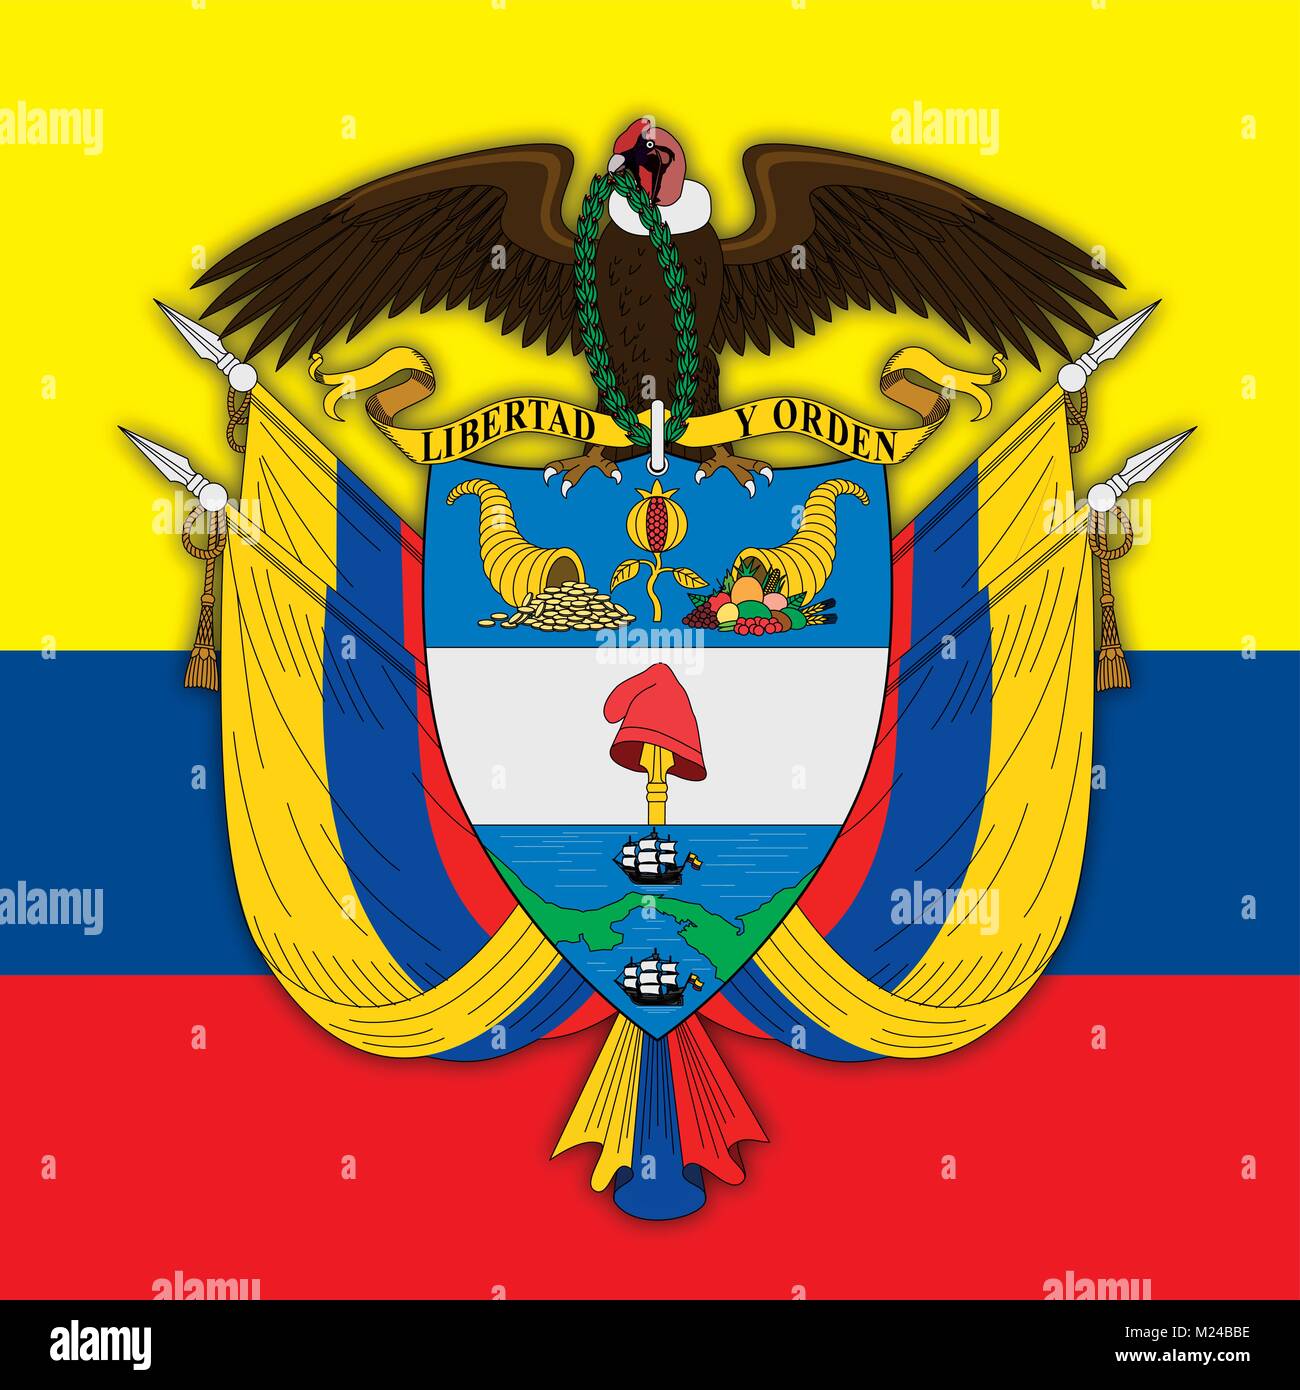 Colombia coat of arms and flag, official symbols of the nation Stock